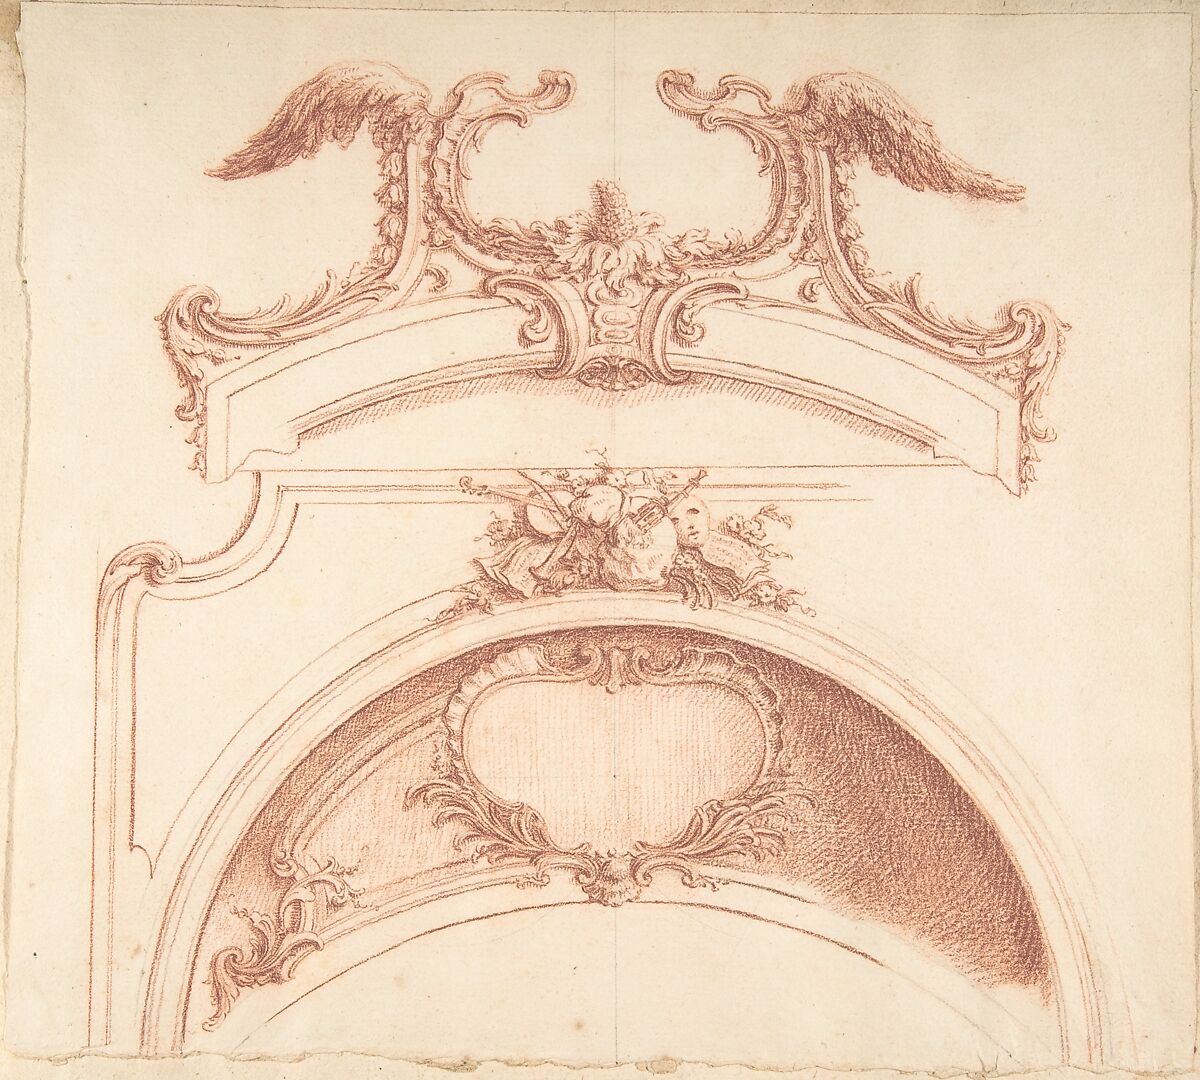 Preparatory Studies for Plates 90 and 91 of "Maisons de plaisance," Volume II, Jacques François Blondel  French, Red chalk over traces of black chalk. Horizontal black-chalk line at center, and round compass marks in black chalk on lower drawing